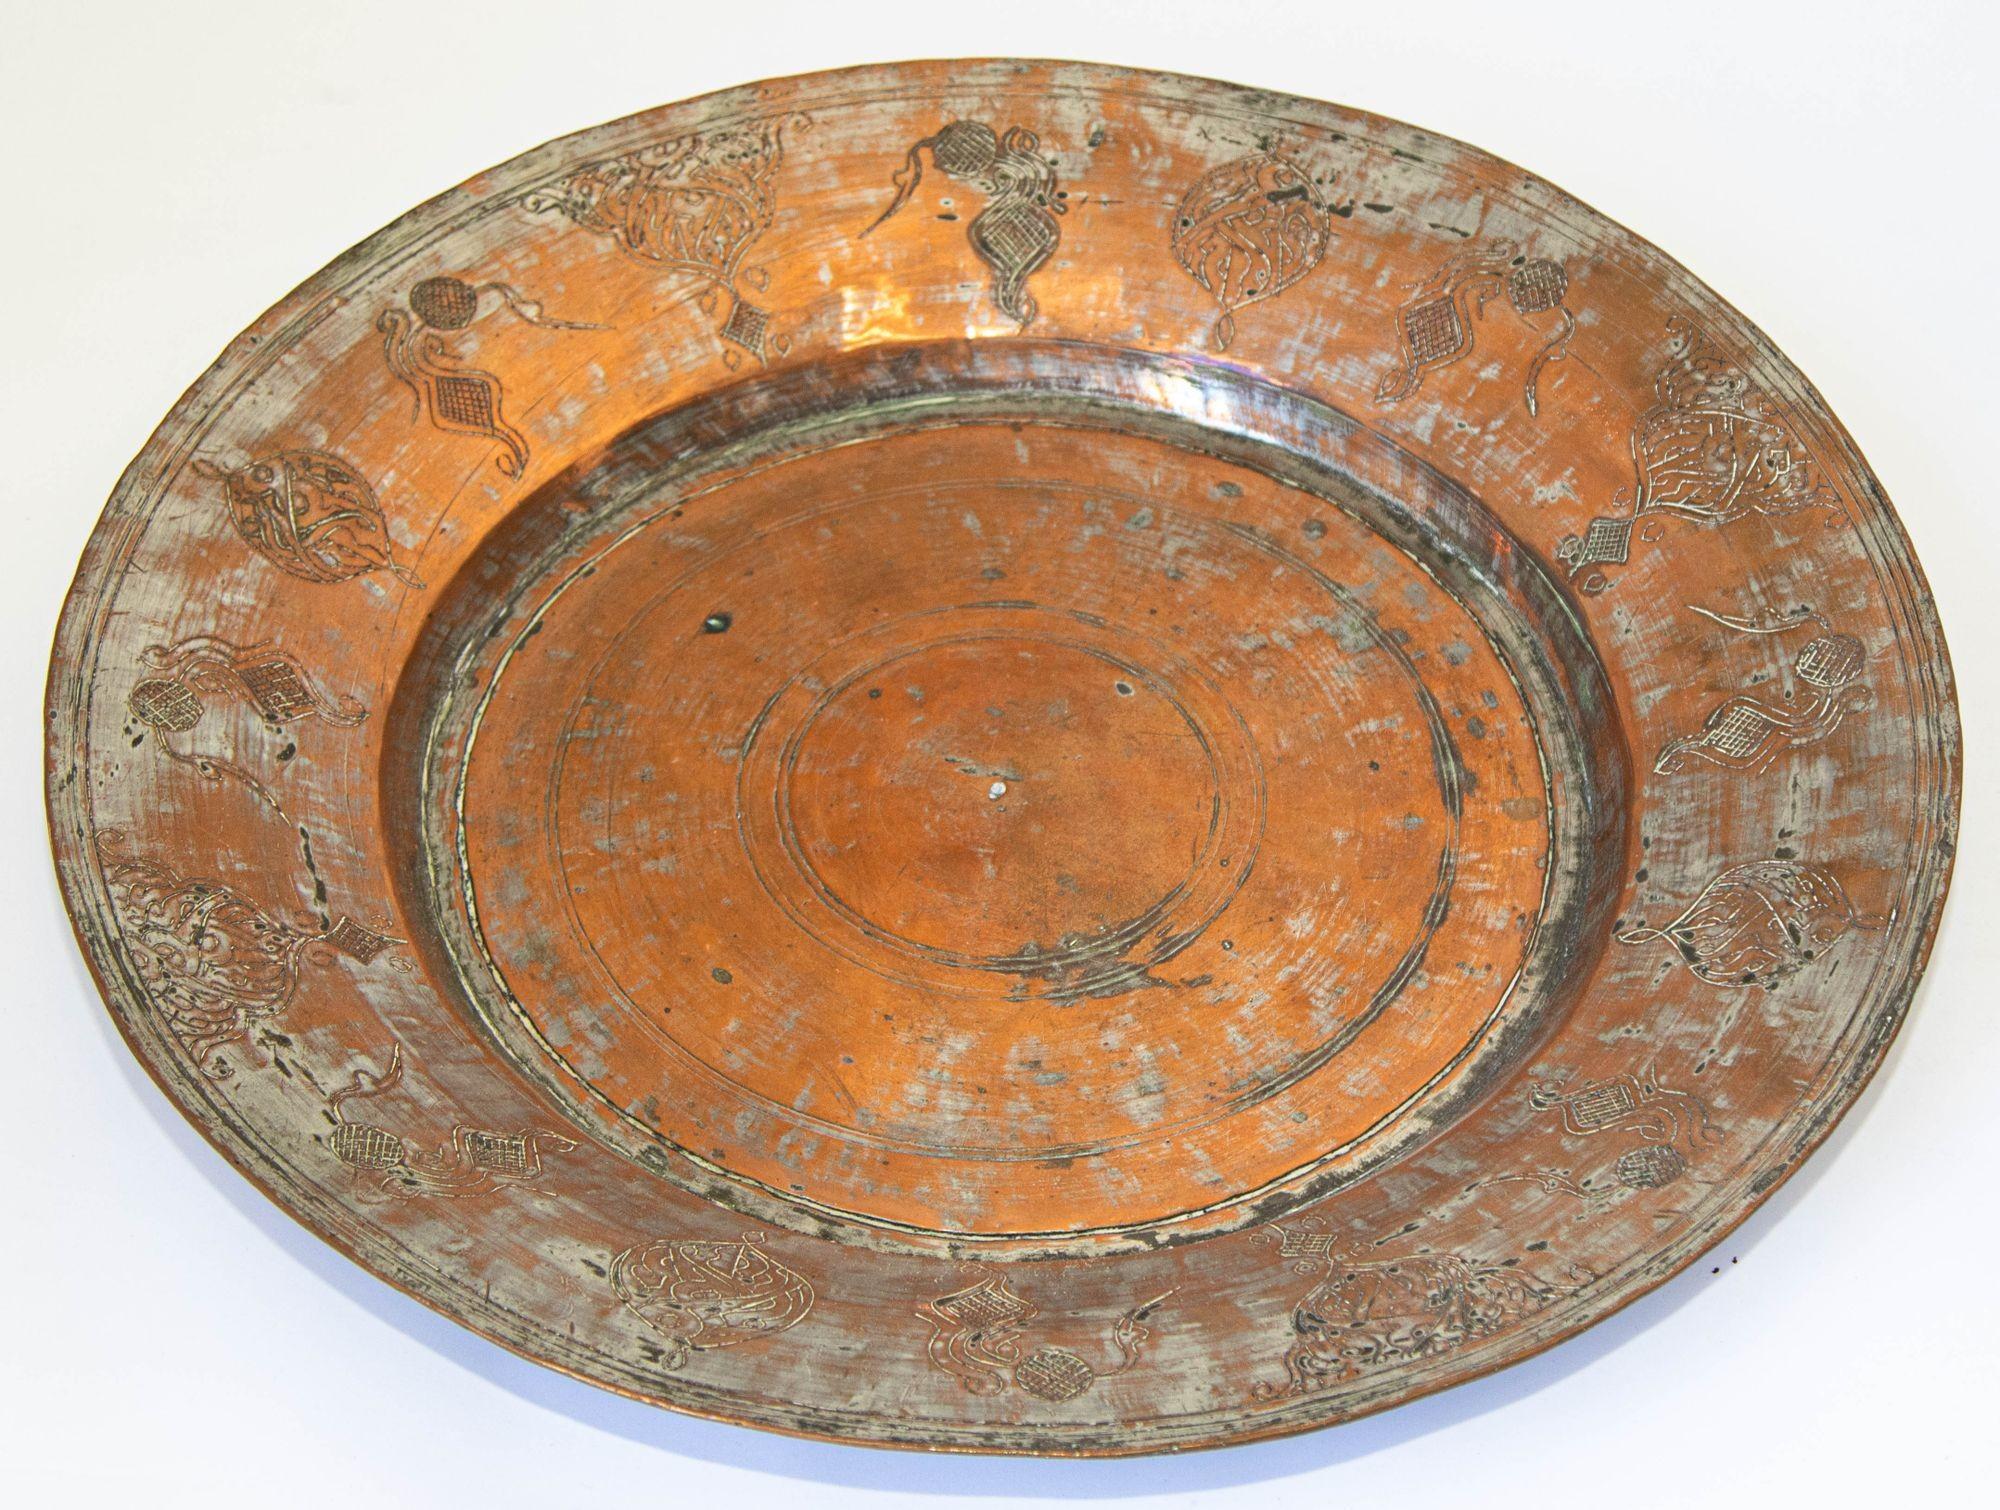 Large Antique Tinned Copper Rajasthani Vessel Bowl 4